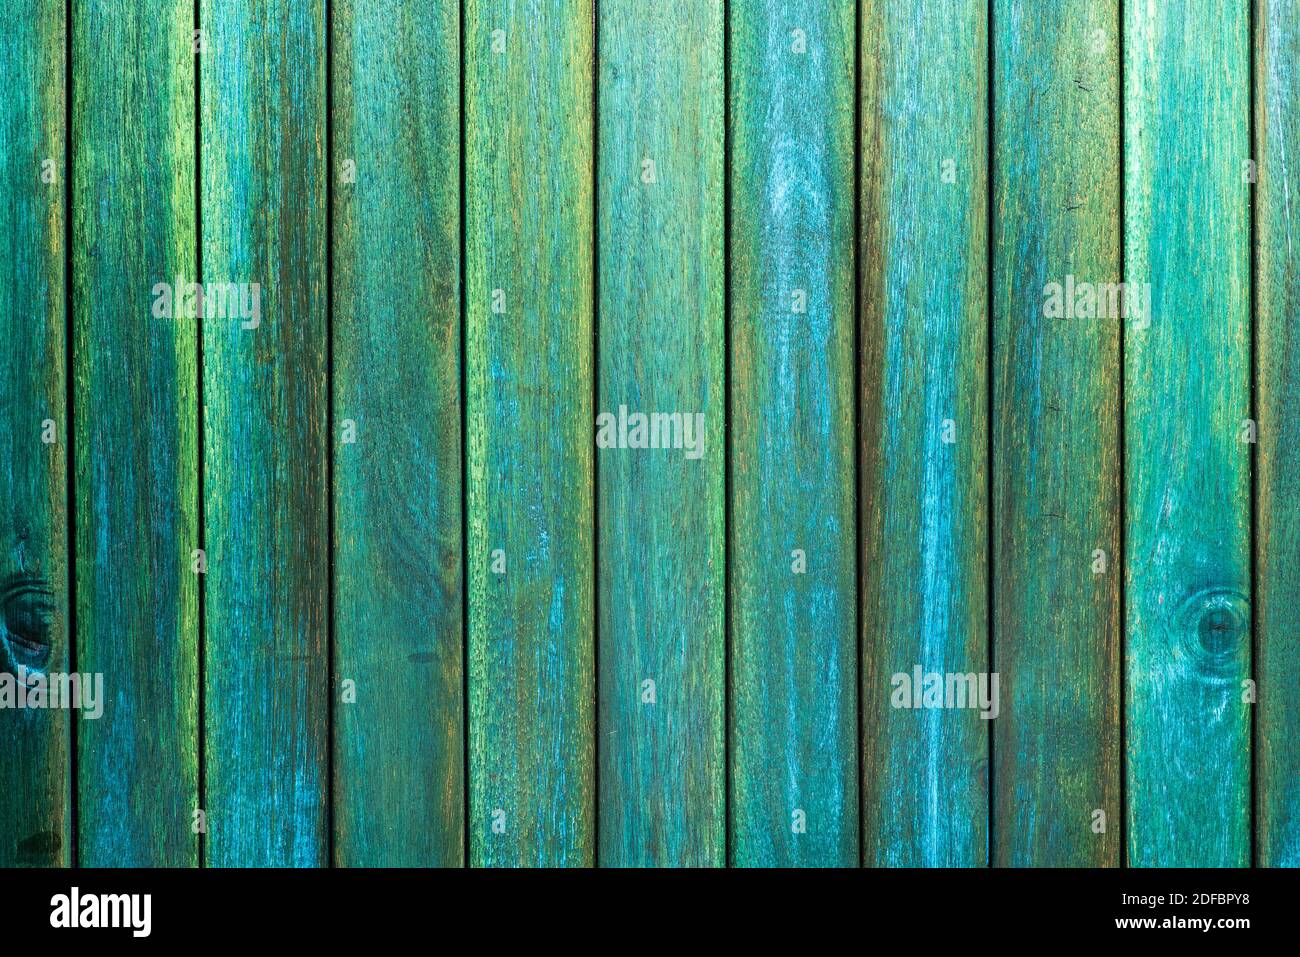 Green wooden plank fence background Stock Photo